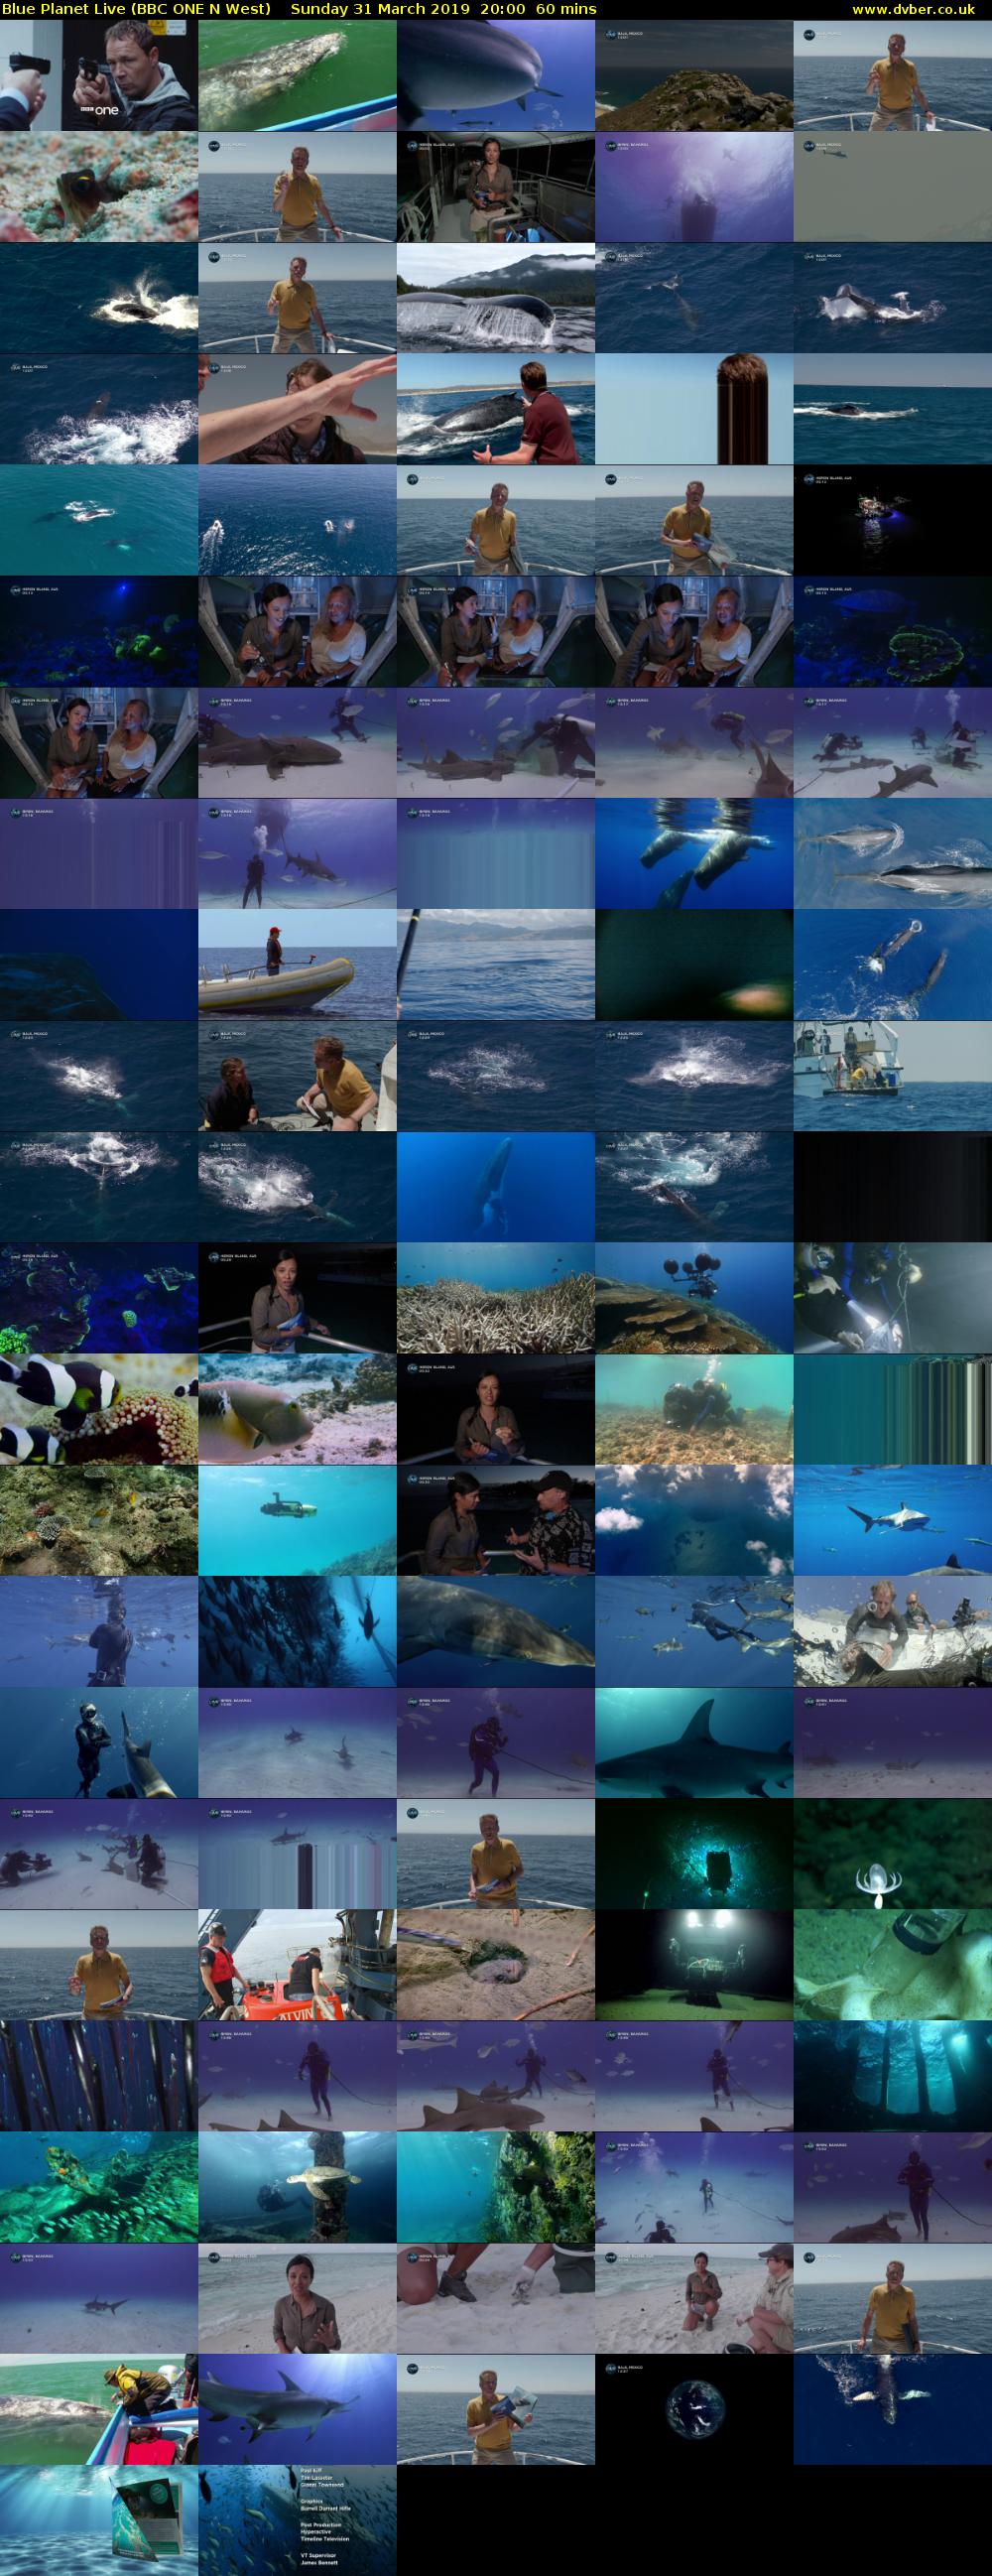 Blue Planet Live (BBC ONE N West) Sunday 31 March 2019 20:00 - 21:00